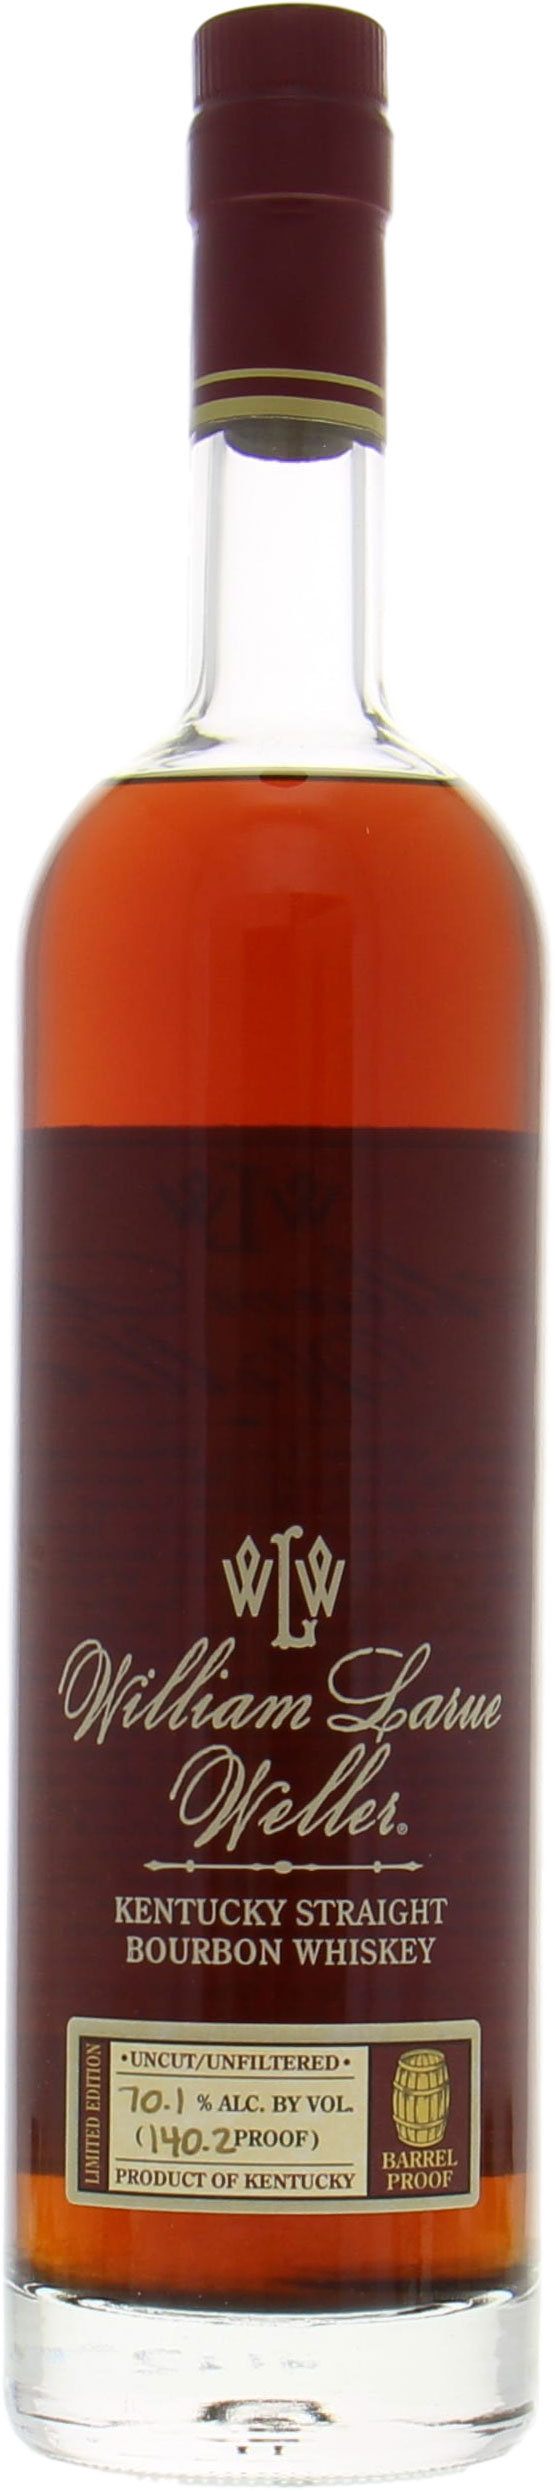 Buffalo Trace - William Larue Weller 12 Years Old Limited Edition 140.2 Proof 70.1% 2002